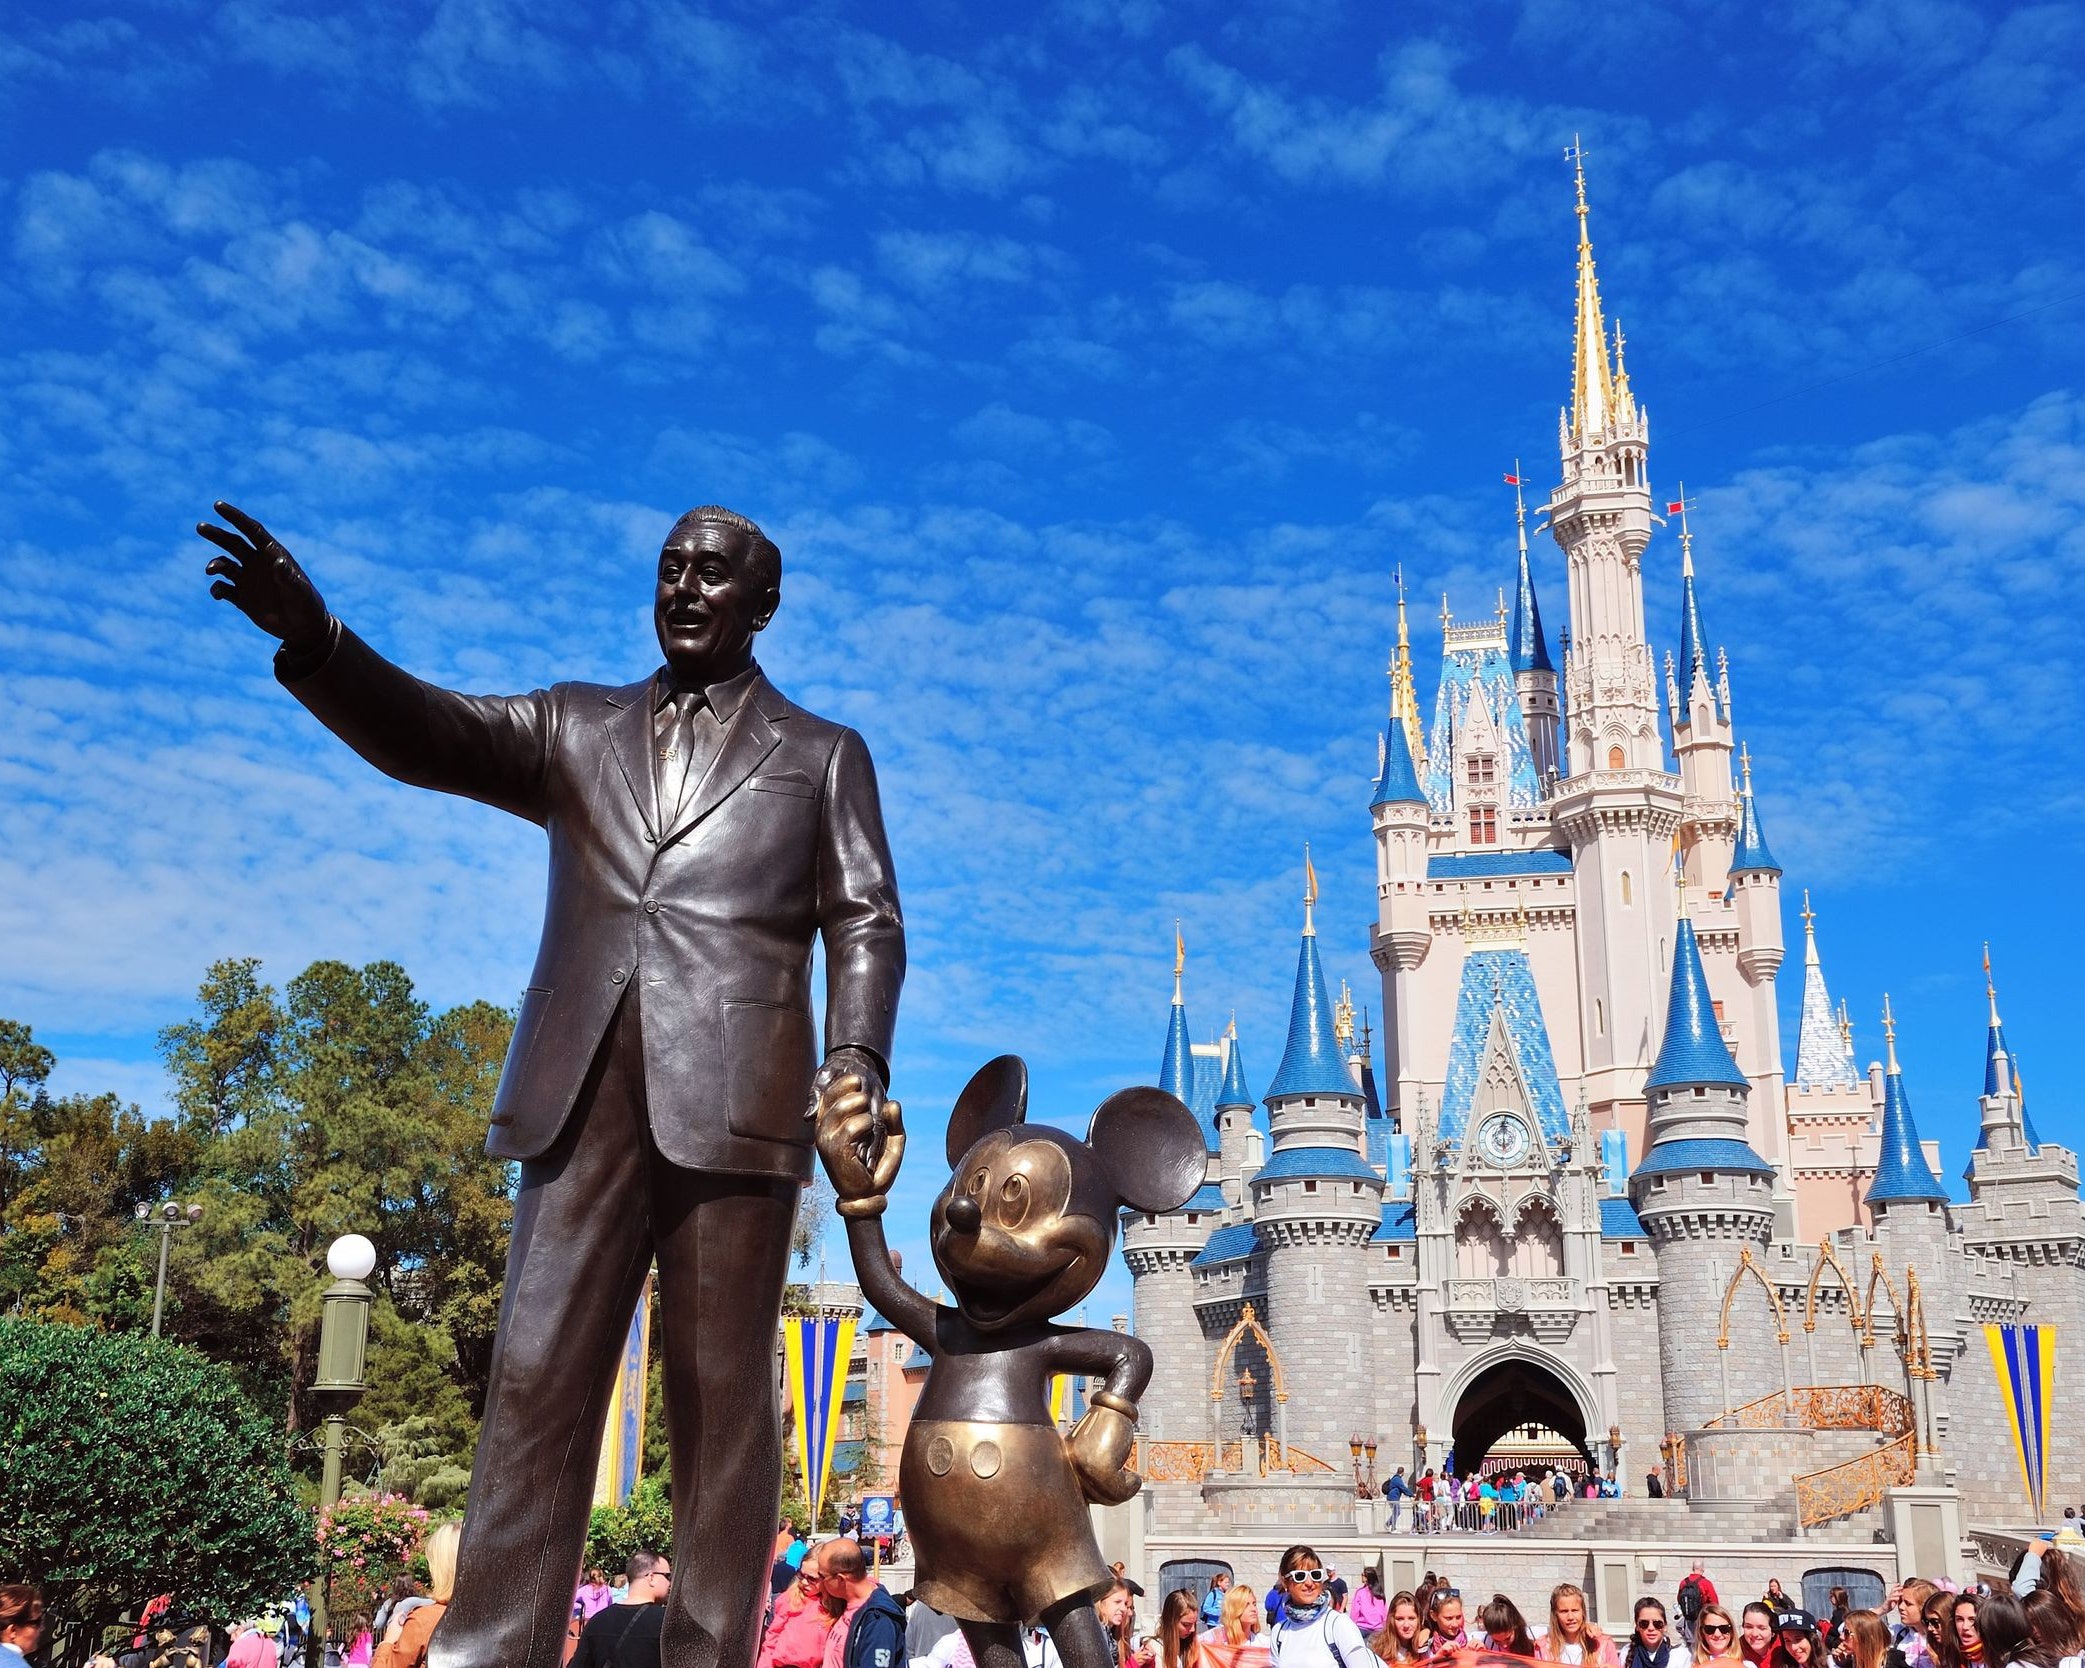 How to Plan a Disney Vacation: 14 Tips for Your Trip to Walt Disney World. Condé Nast Traveler